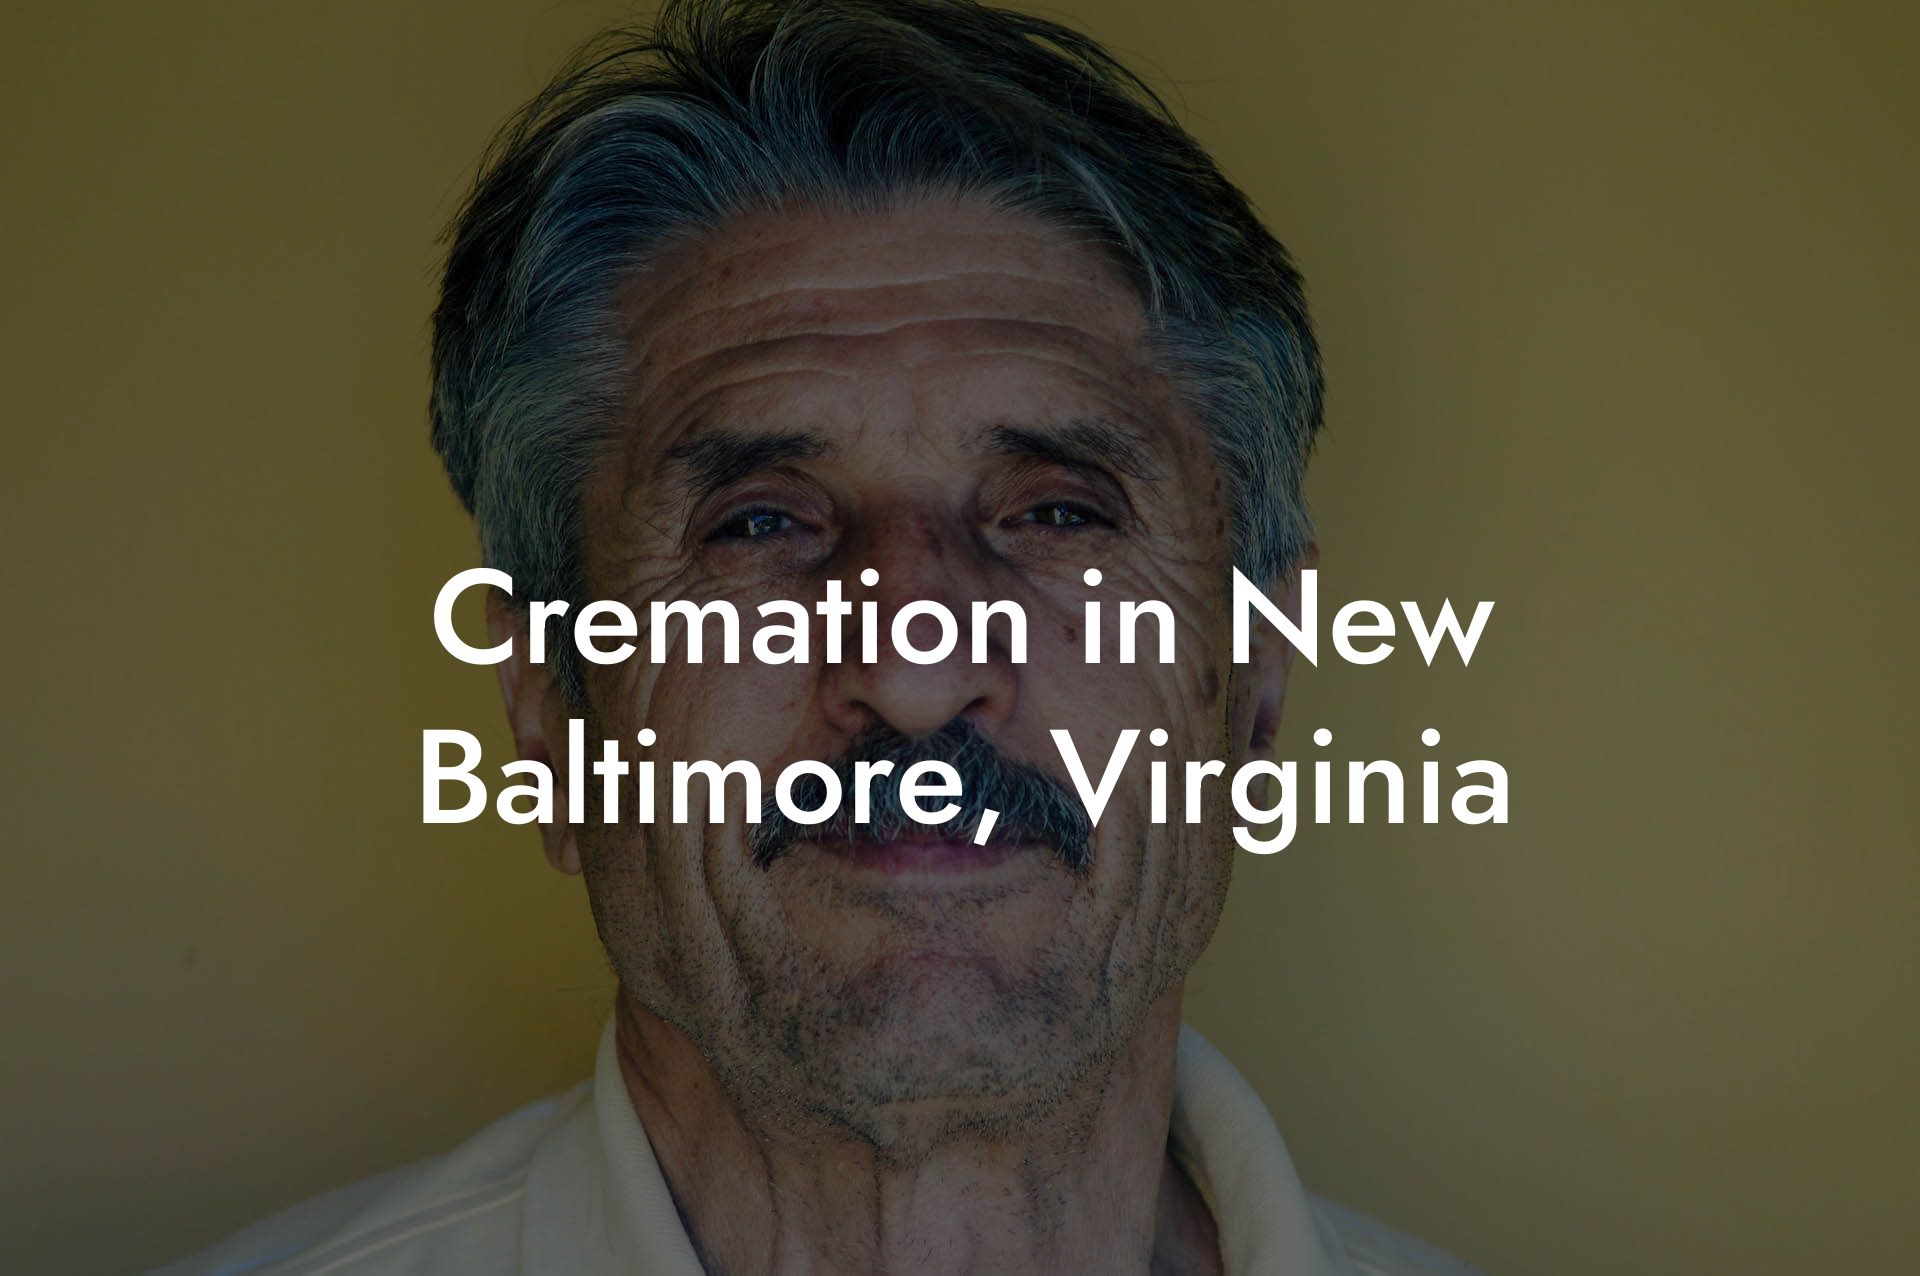 Cremation in New Baltimore, Virginia